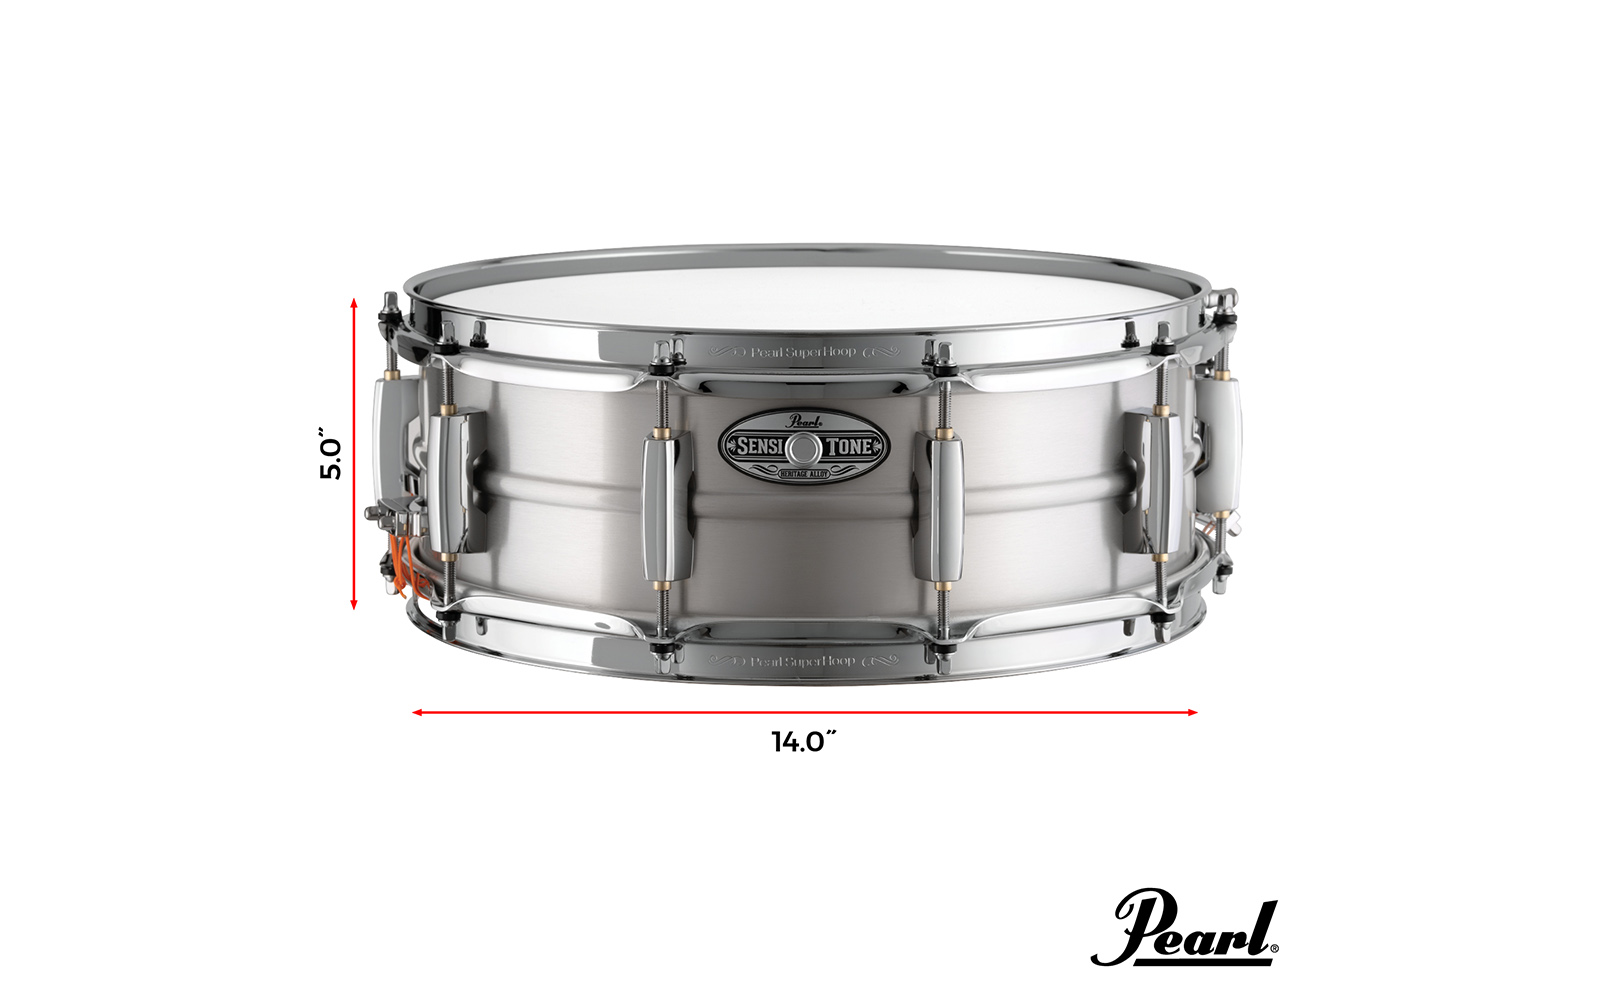 Heritage Alloy Aluminum  Pearl Drums -Official site